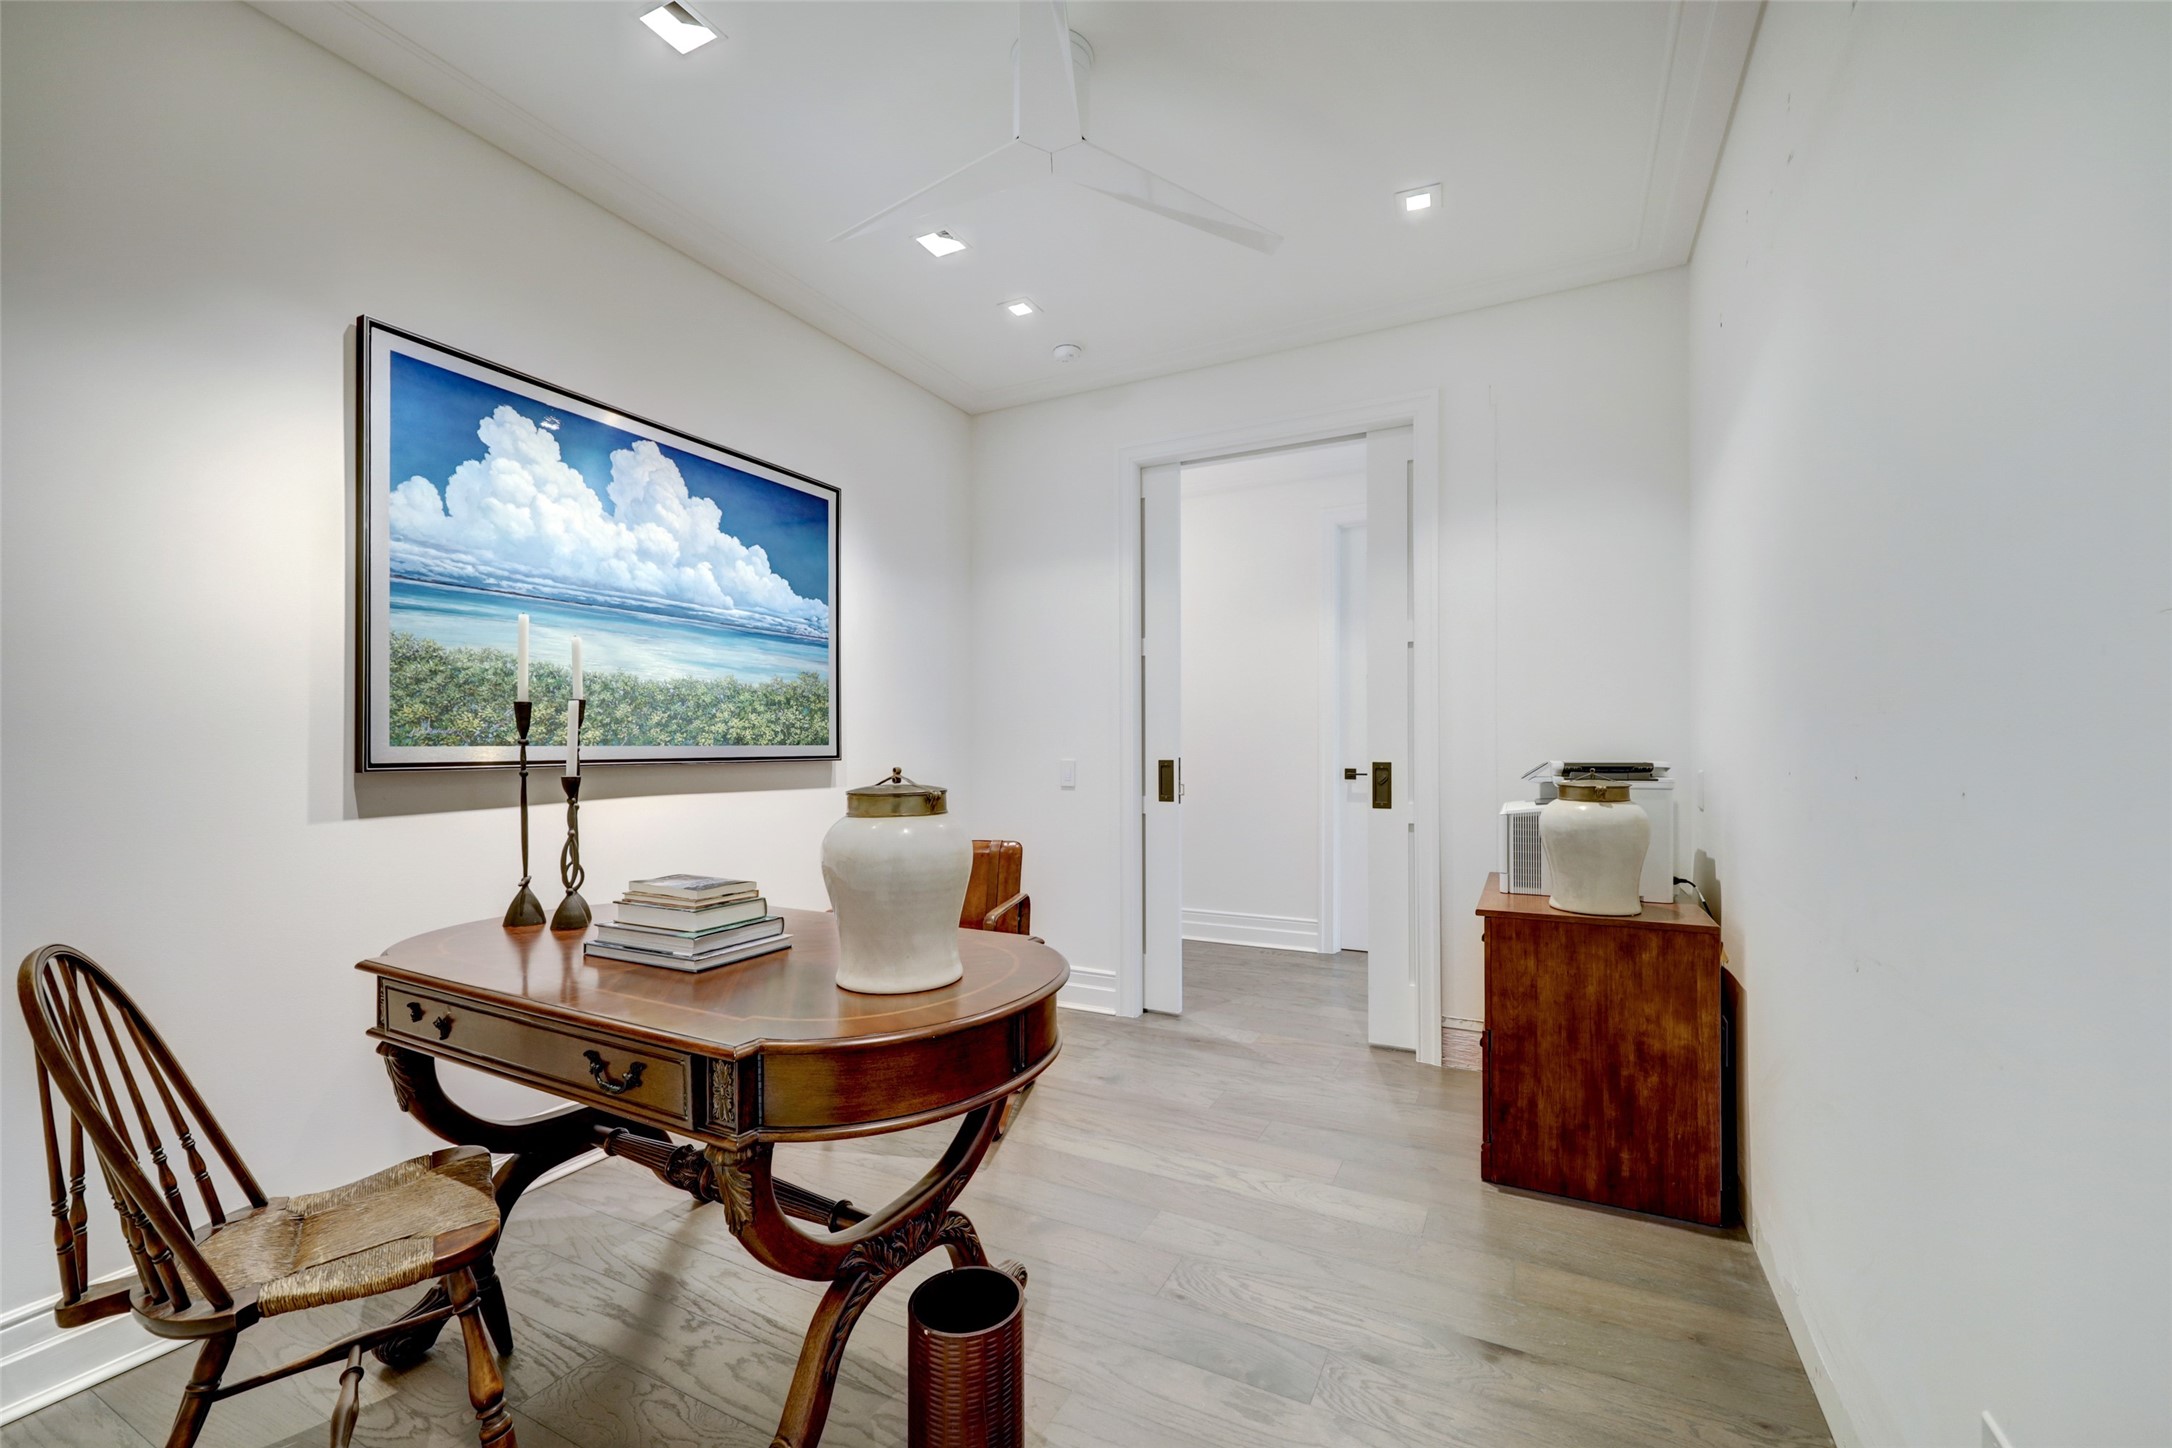 The Study has wide plank wood floors, pocket doors for privacy, and access to the Guest Bath.